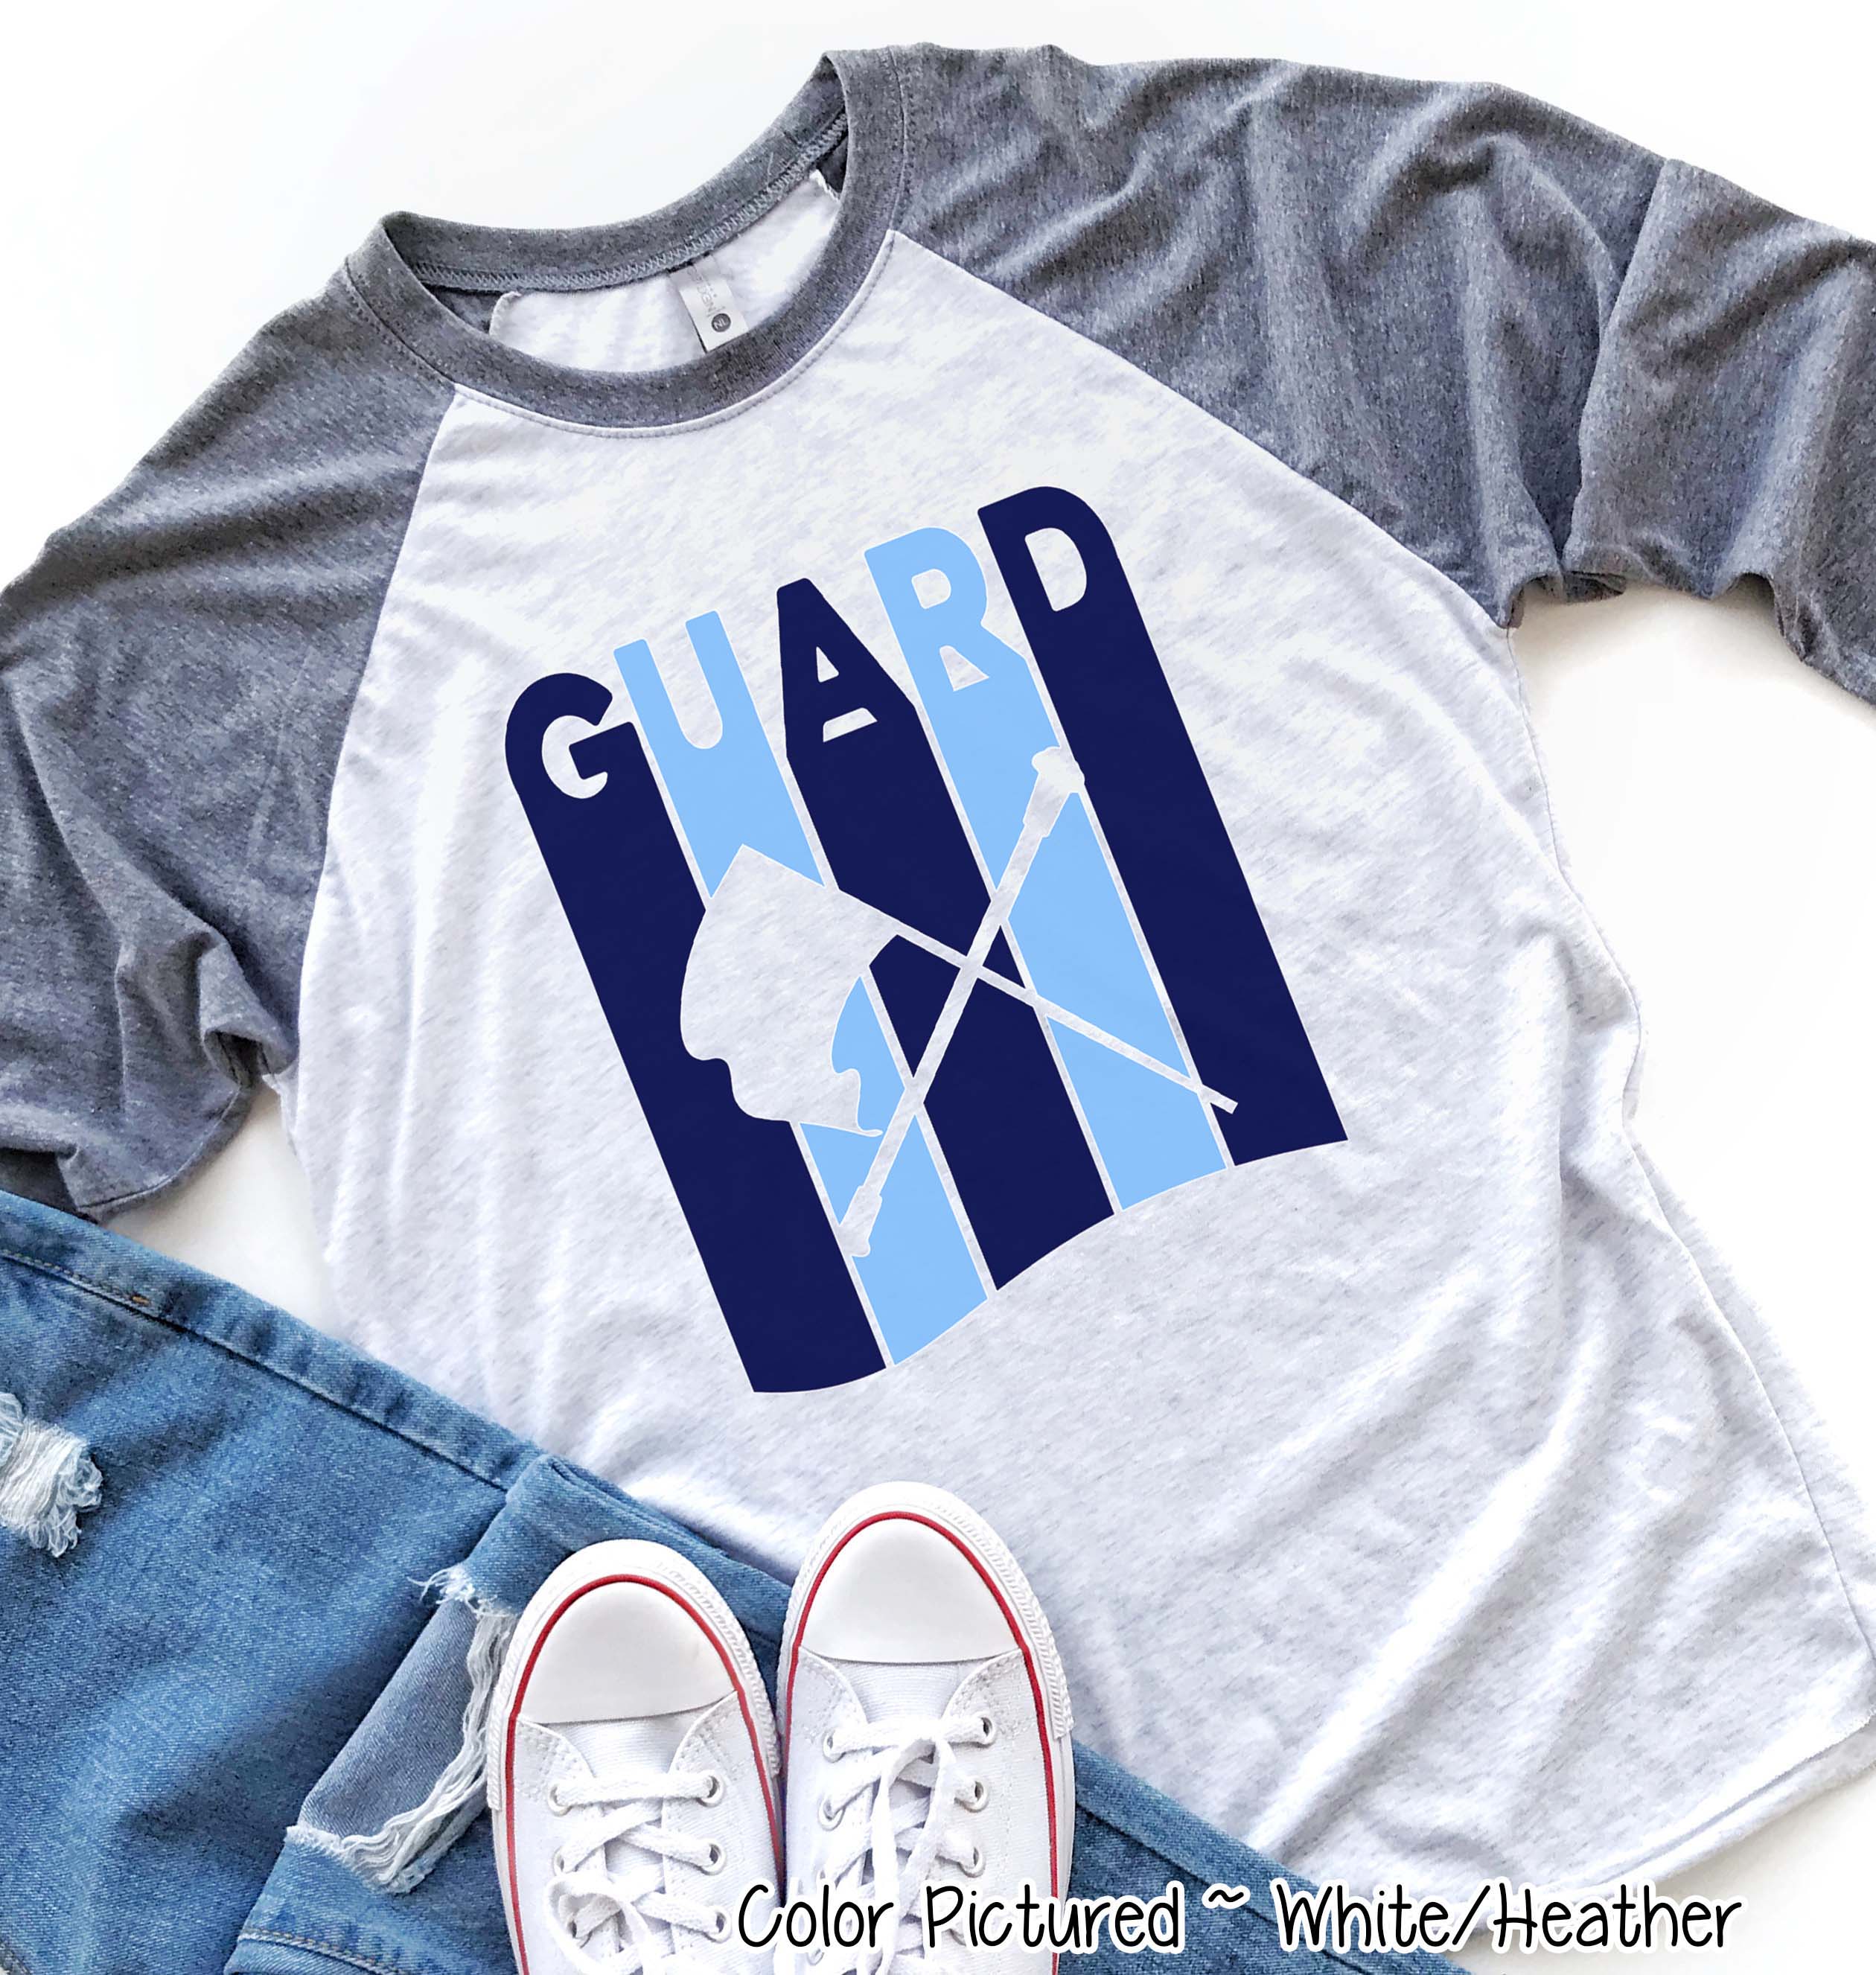 Personalized Color Guard Matching Team Tee